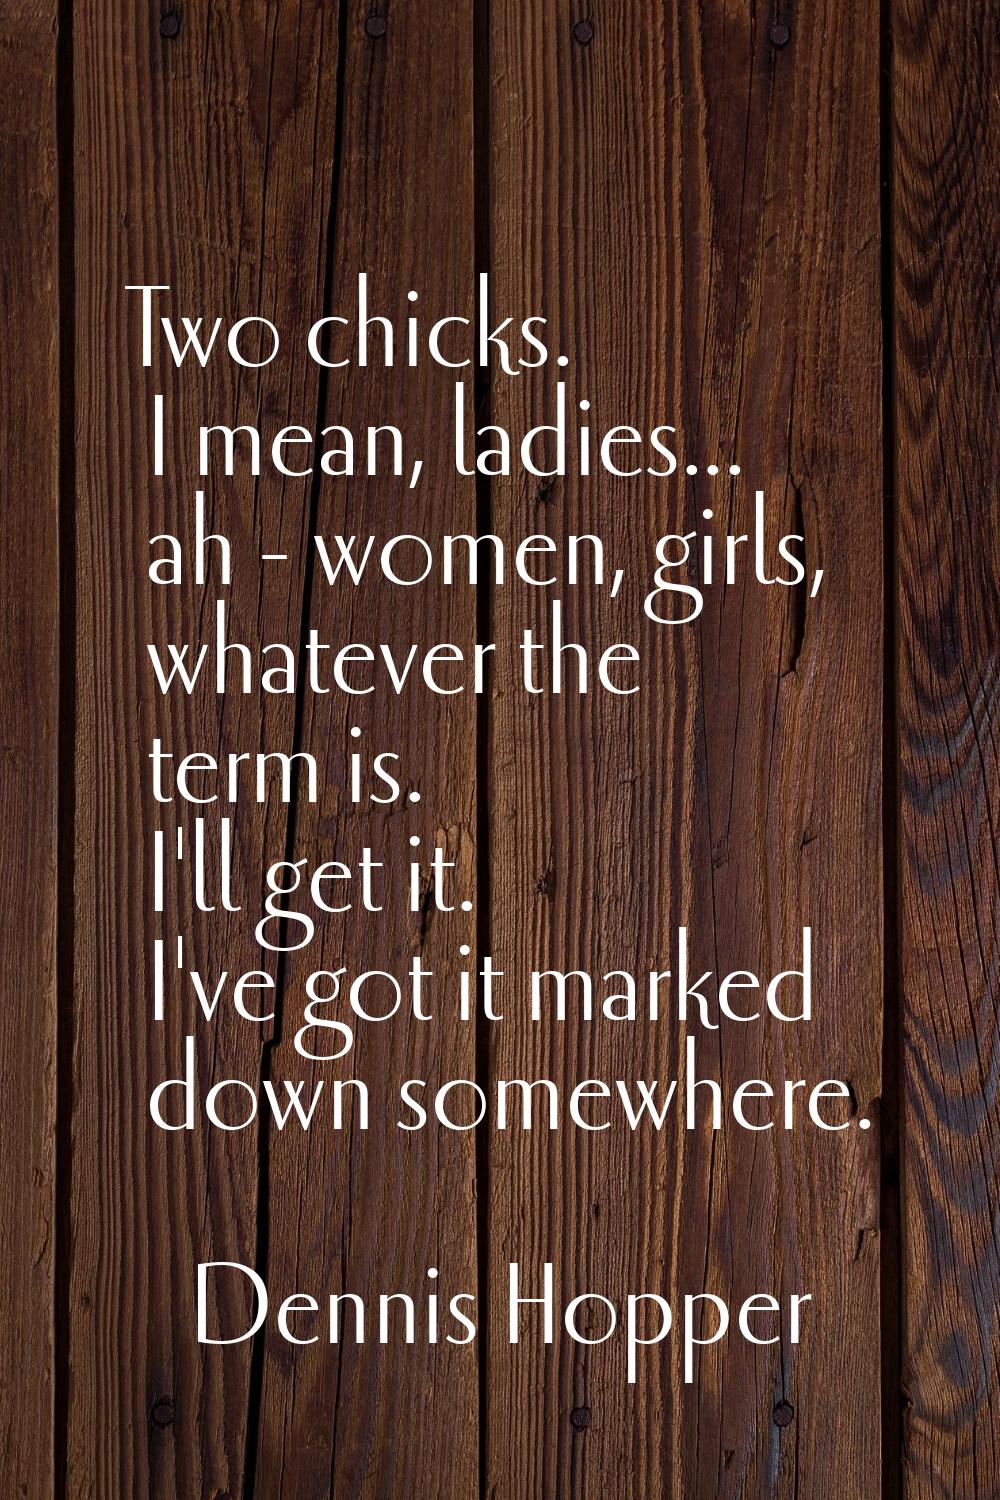 Two chicks. I mean, ladies... ah - women, girls, whatever the term is. I'll get it. I've got it mar